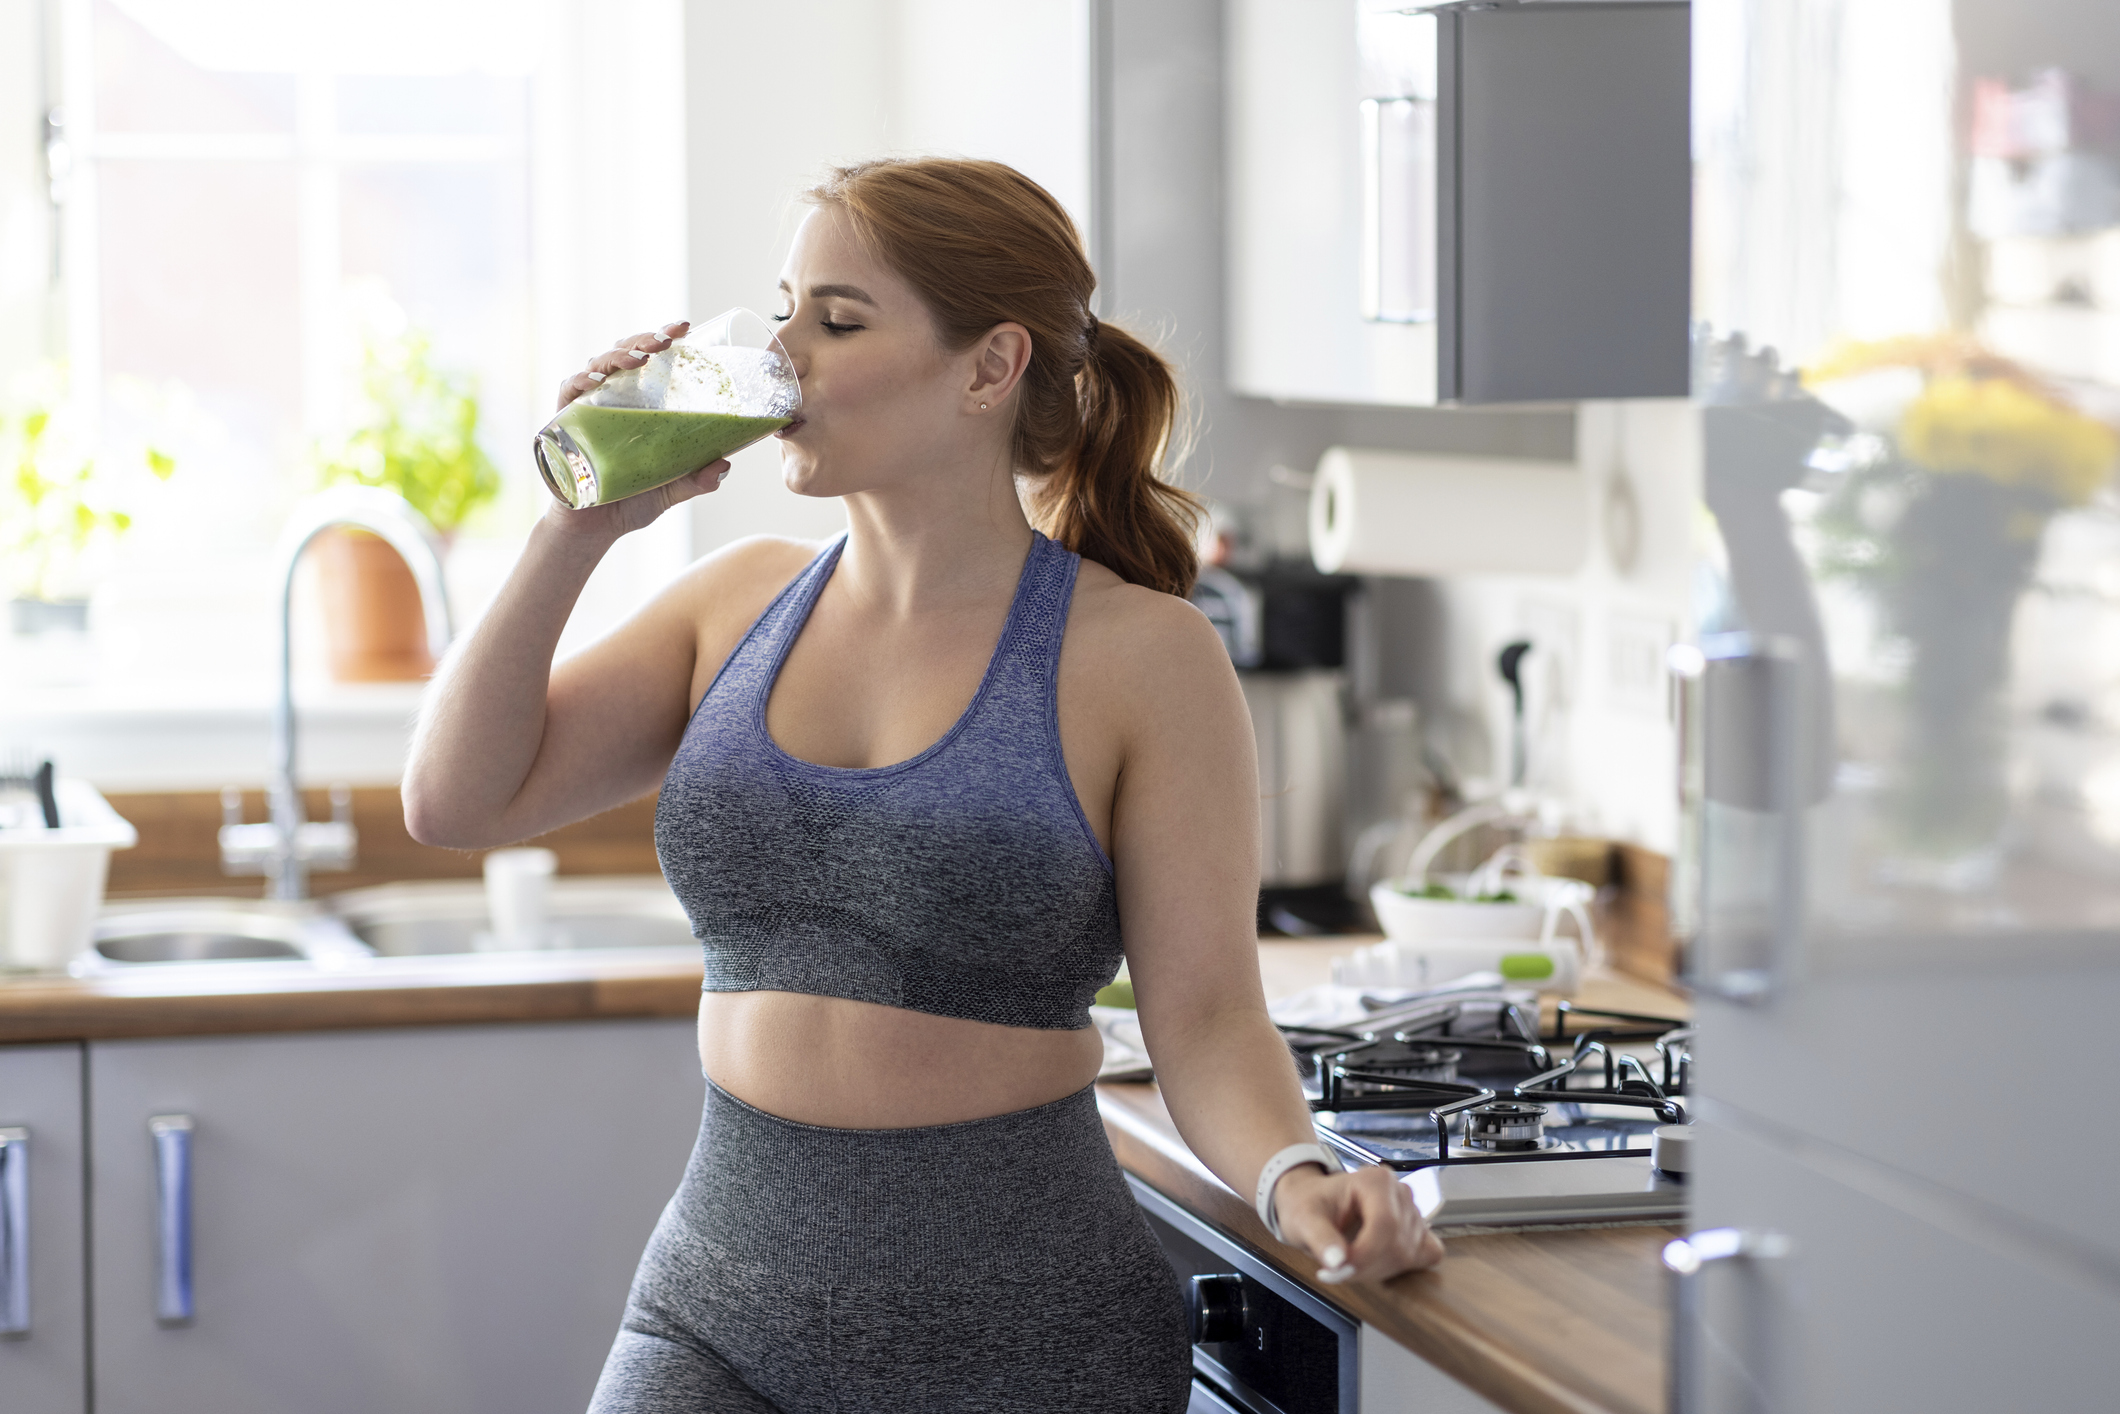 Wedding diet: a woman drinking a smoothie in workout gear